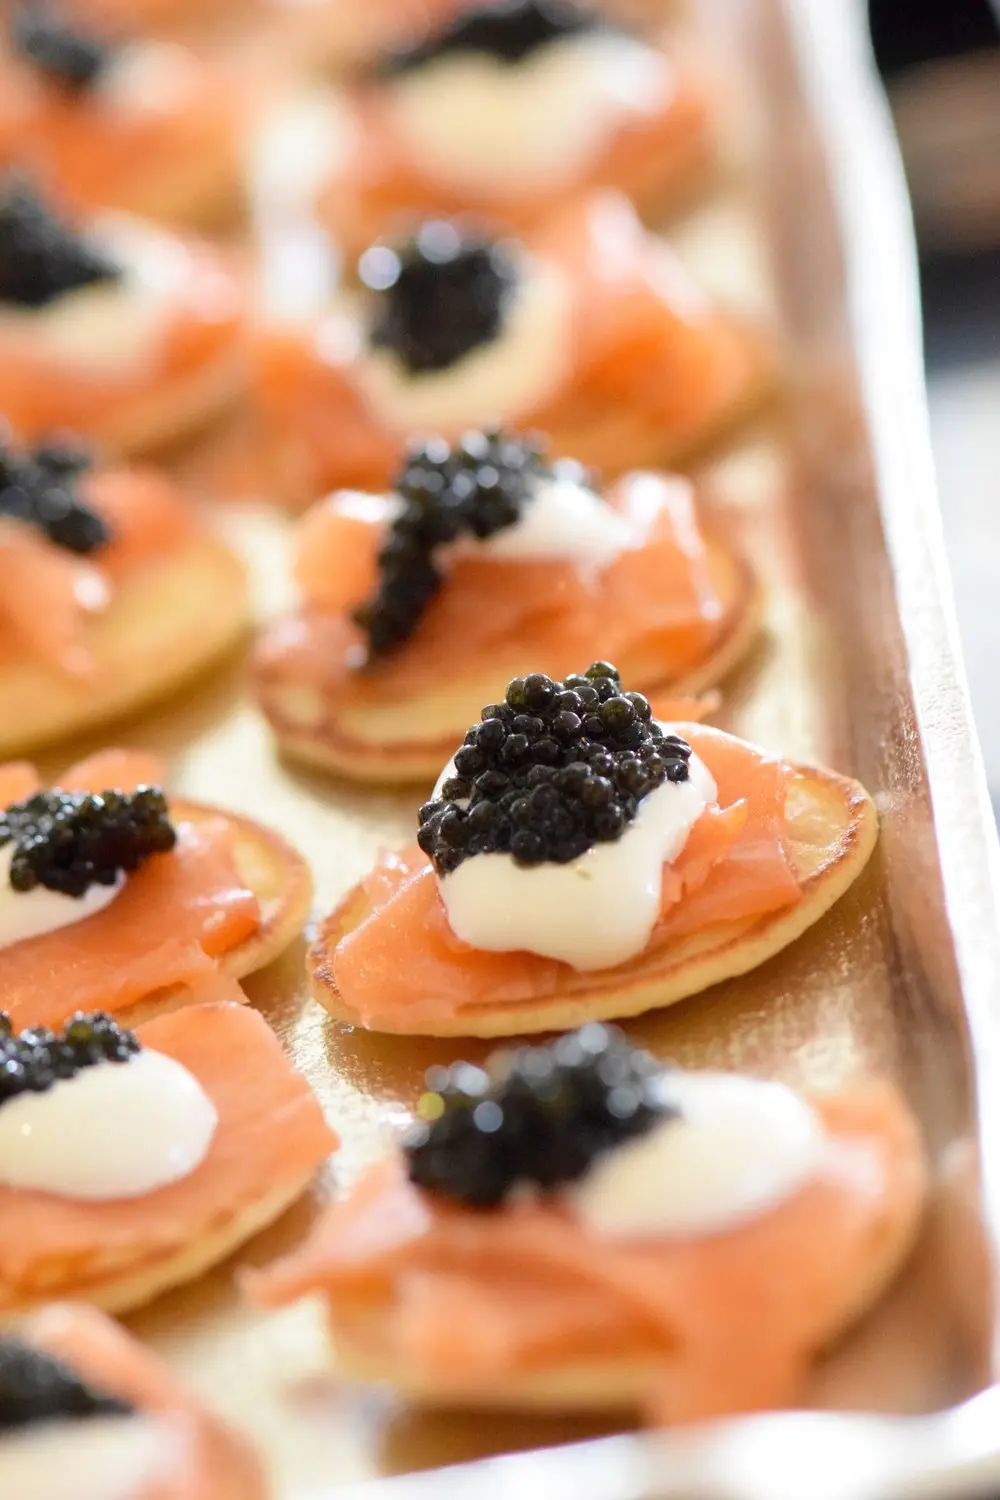 blini with caviar and smoked salmon - What to serve with caviar and blinis